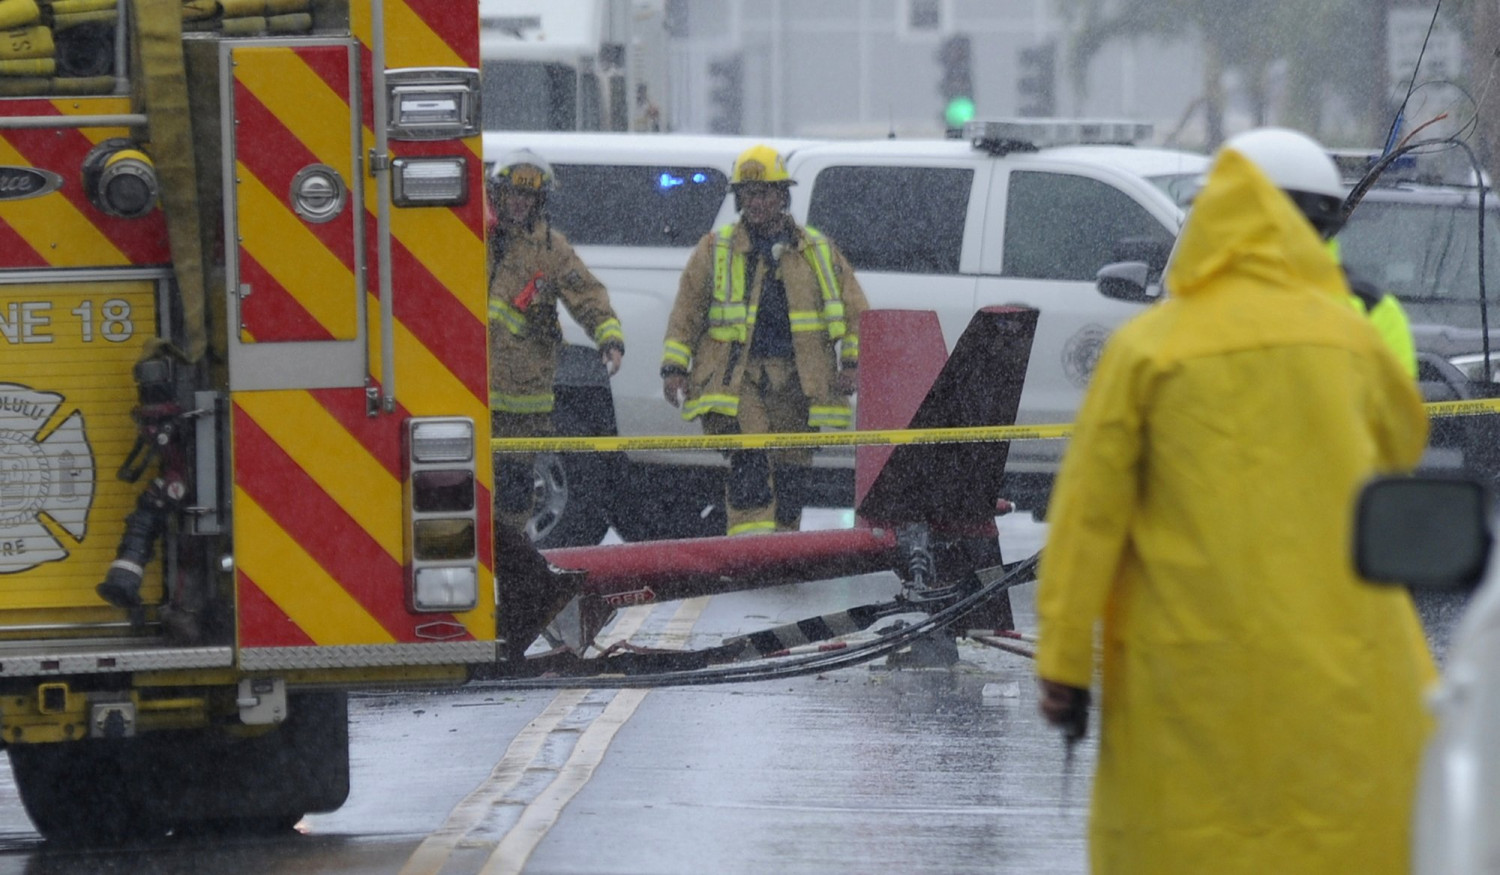 3 Dead After Tour Helicopter Crashes in Hawaii Suburb